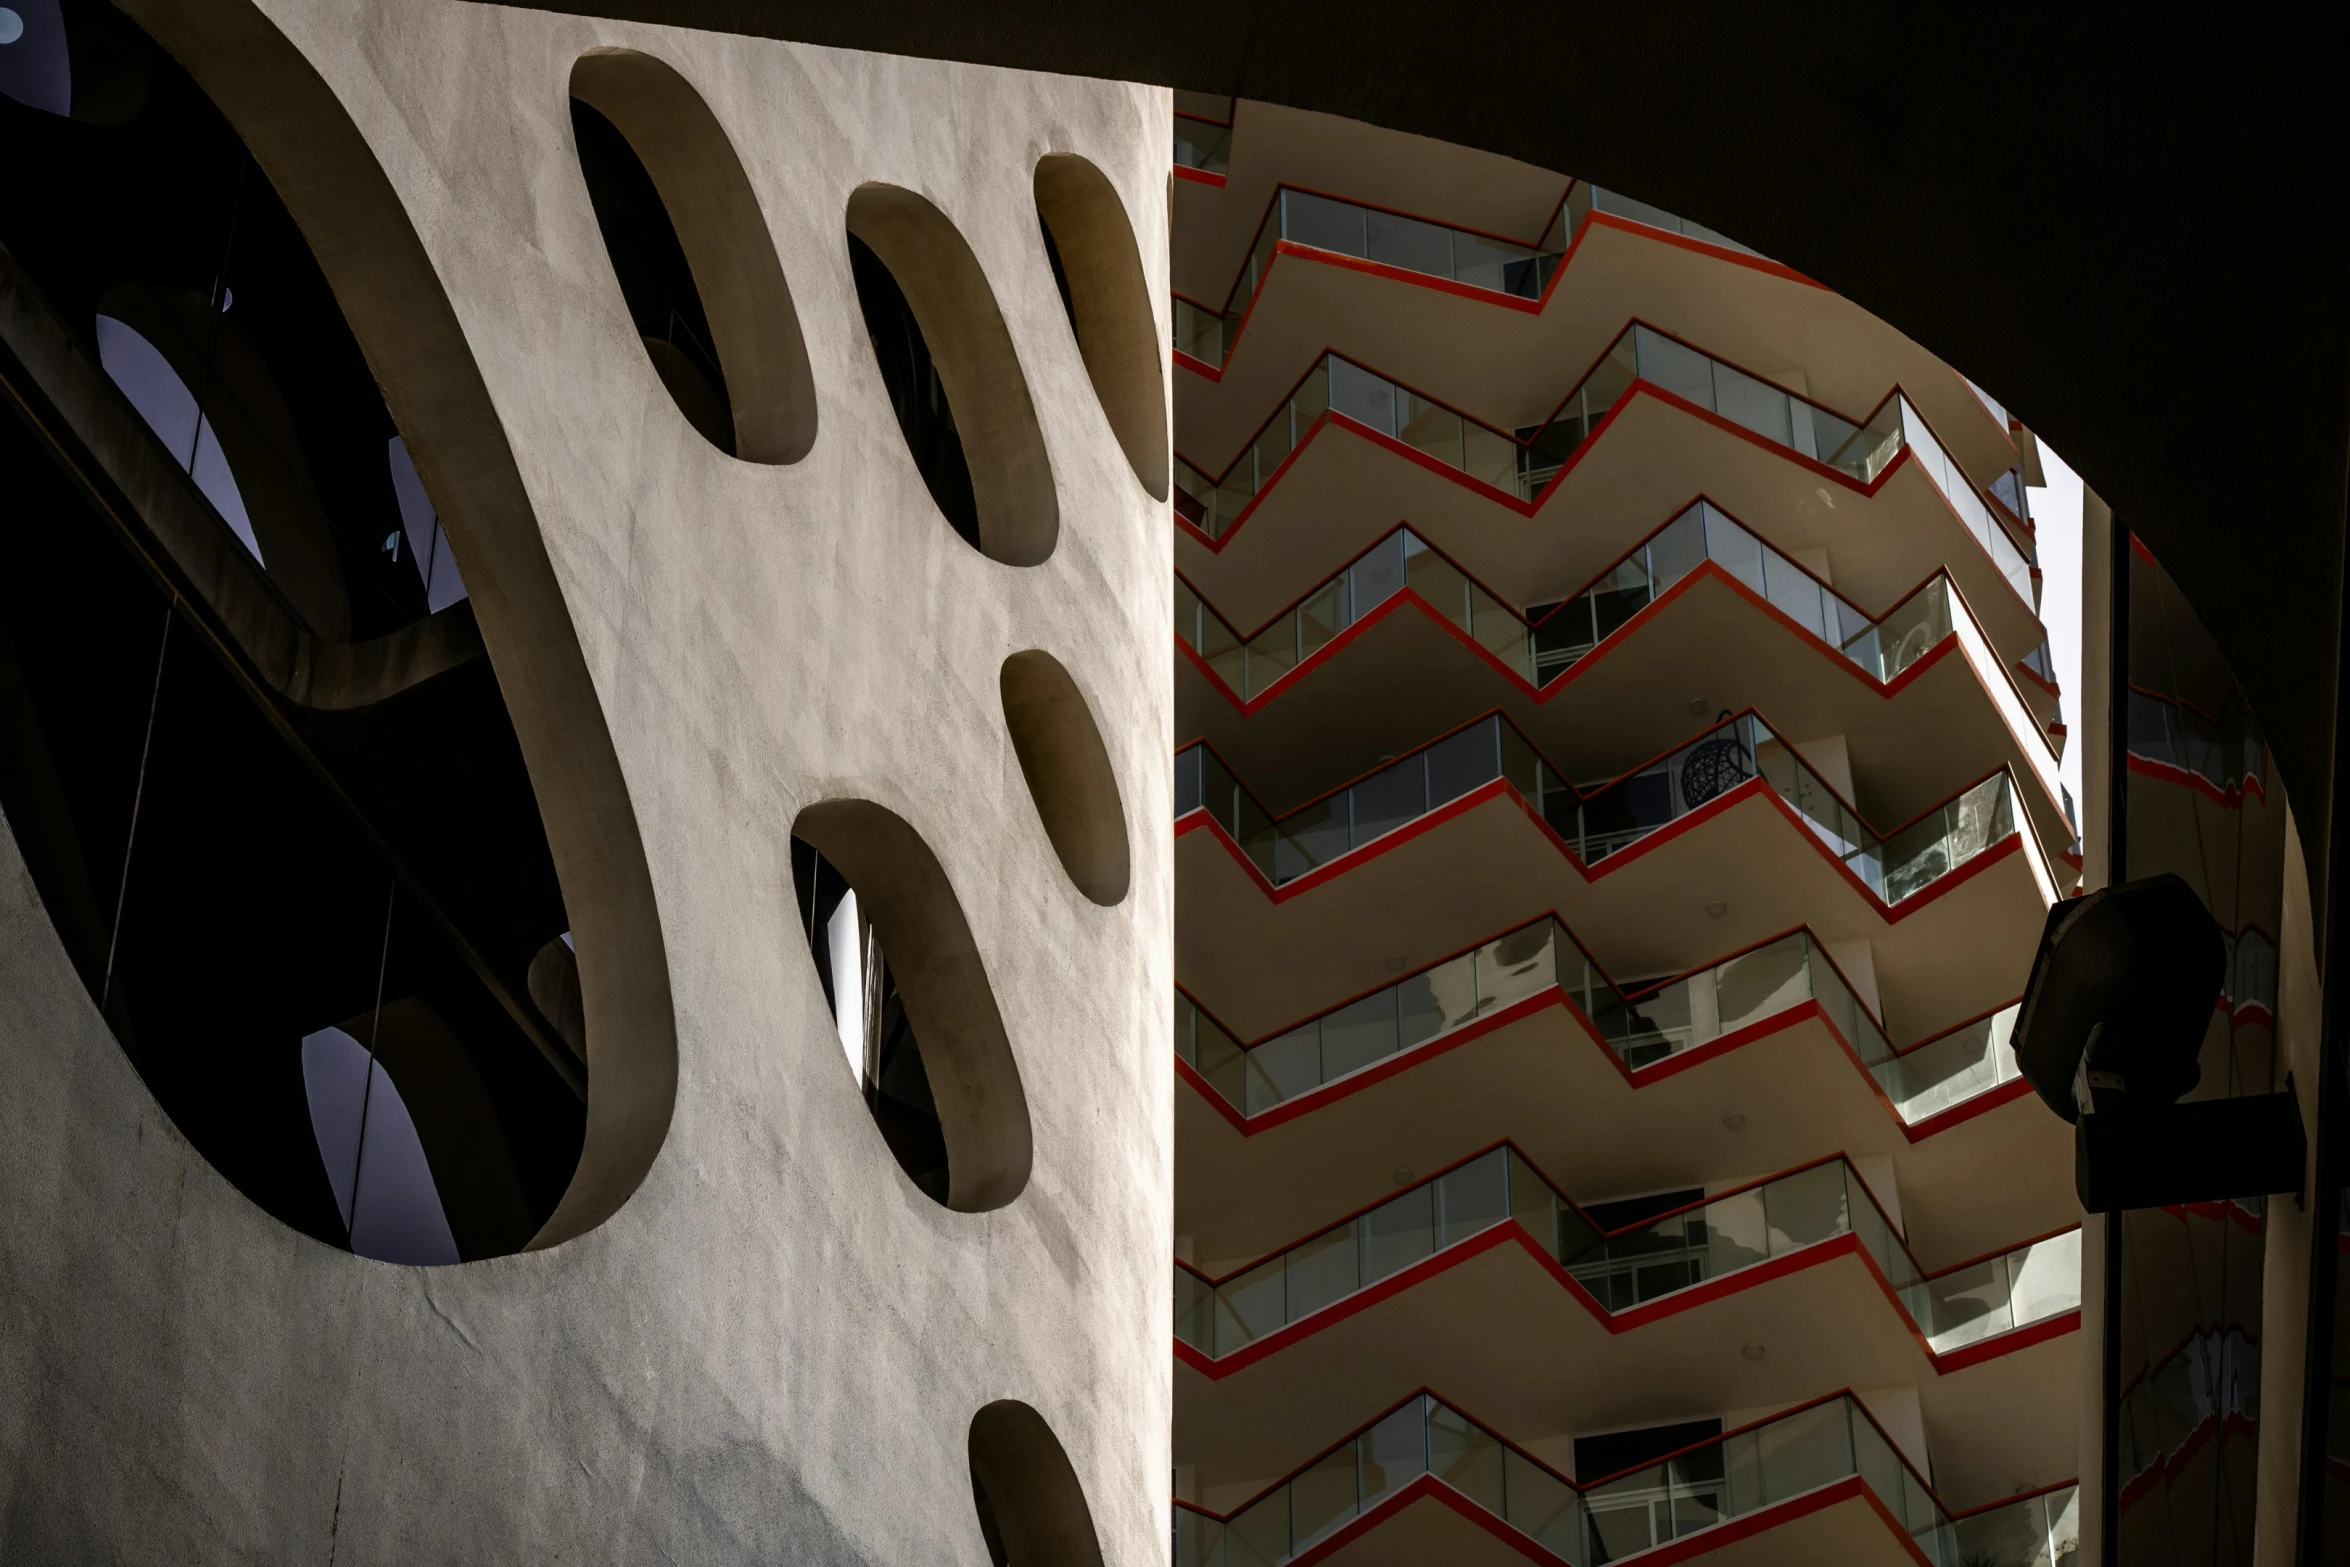 a large multi story building with multiple windows and rounded shapes